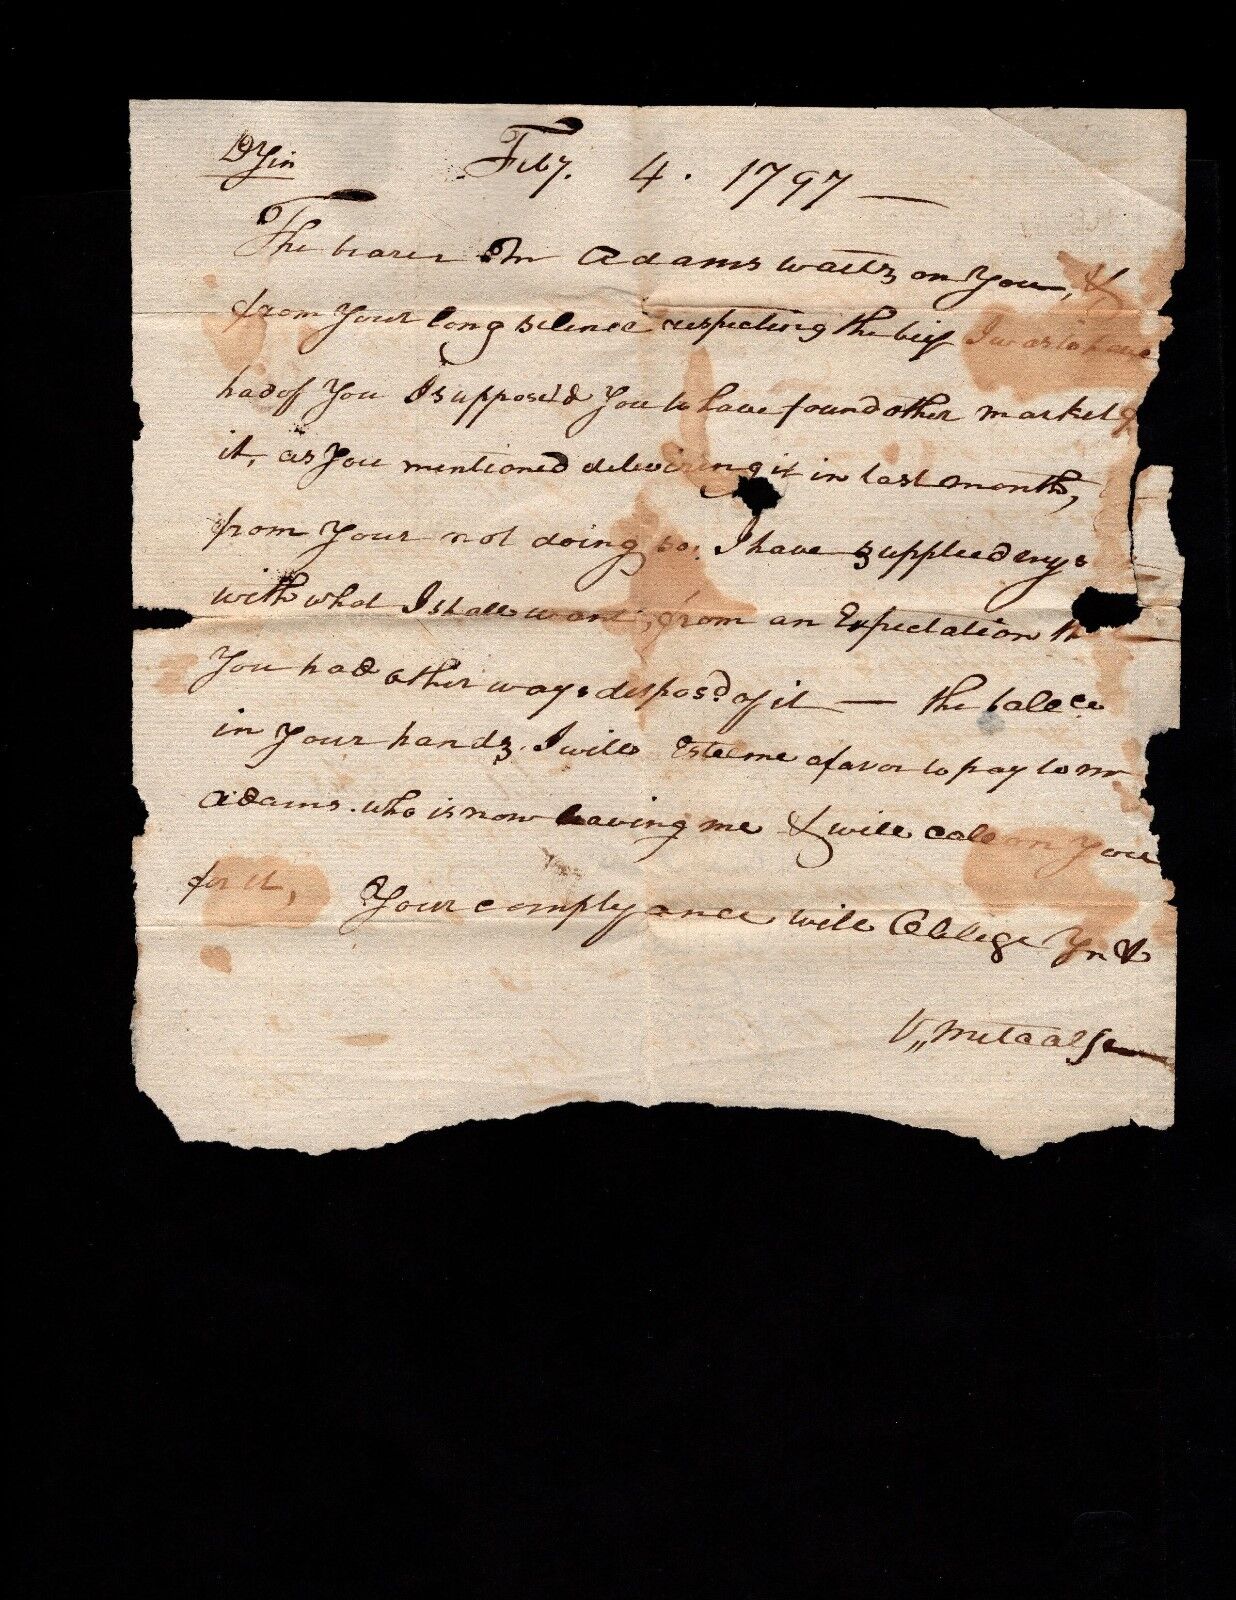 1797 Handcarried Letter V. Metcalfe to William Watts in Campbell County Virginia